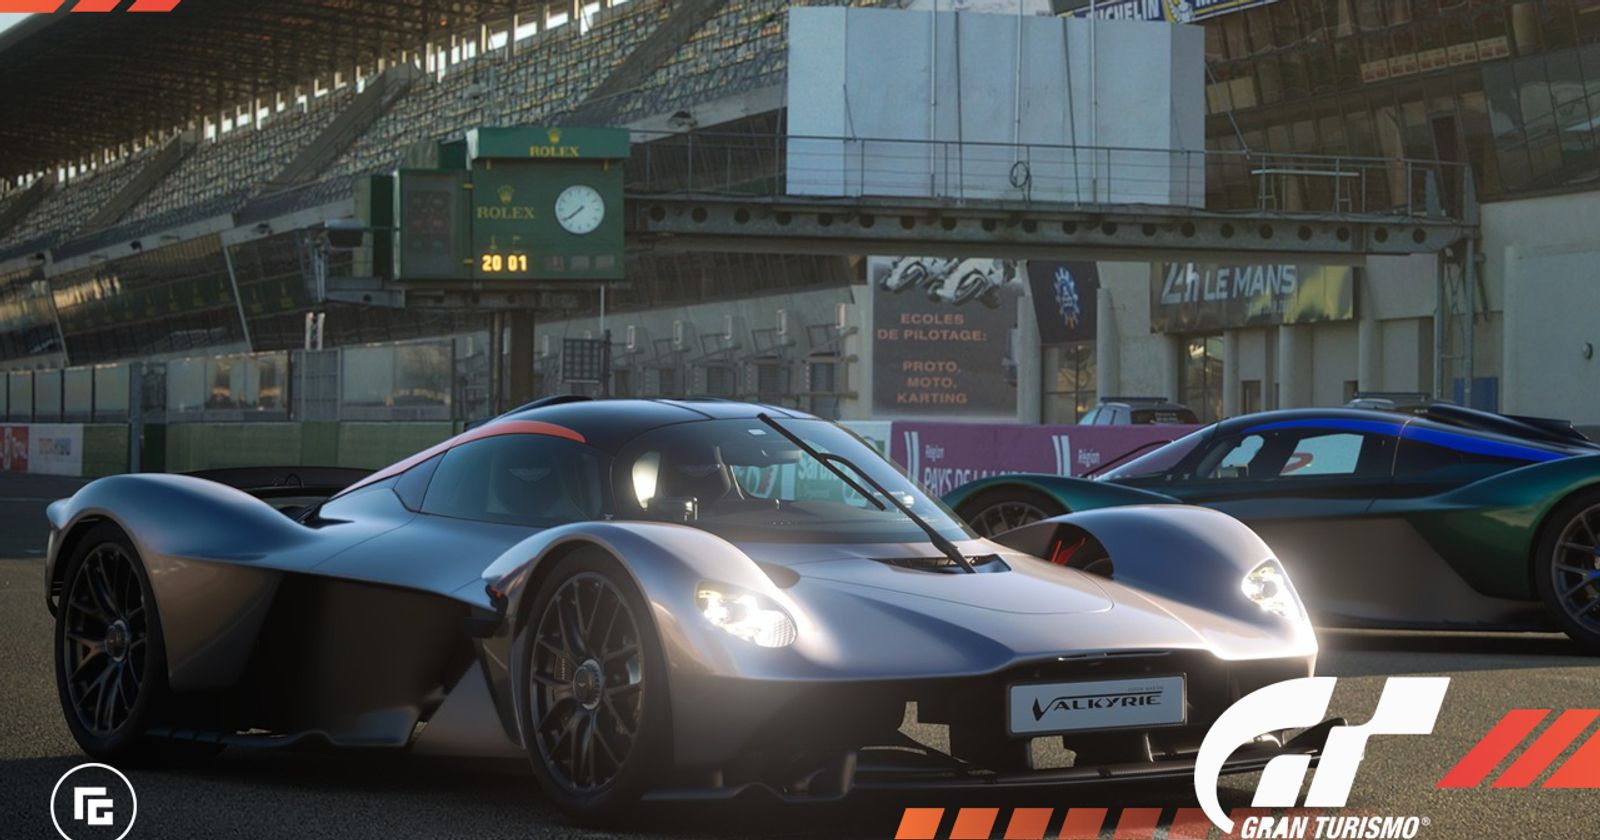 Every Hot Supercar and Race Car We Spotted in the Gran Turismo Movie Trailer